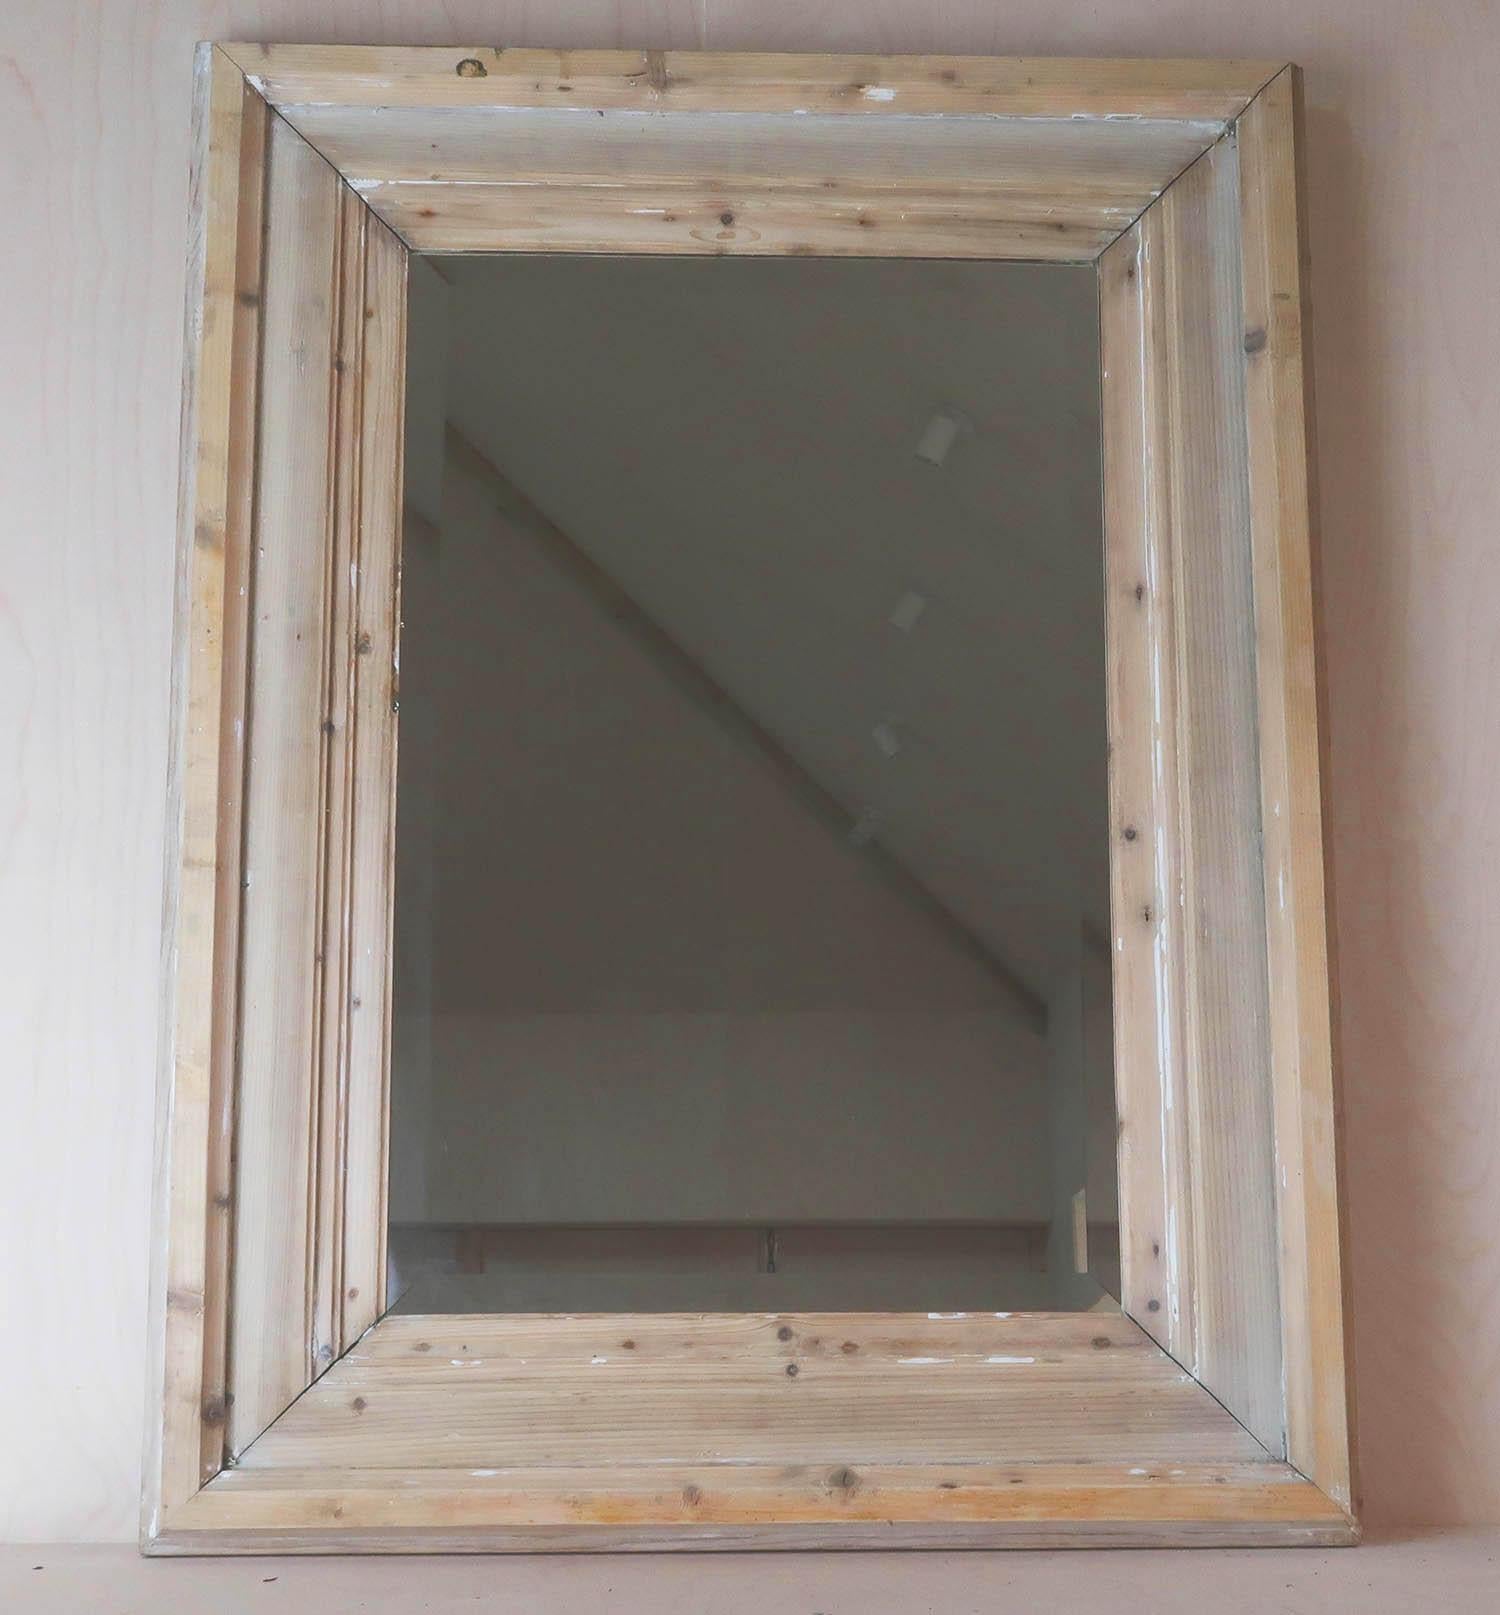 Super pine mirror.

Can be hung both vertically and horizontally

Great rustic look.

Wonderful simple lines. 

The bevelled mirror plate is new.

Free UK delivery.